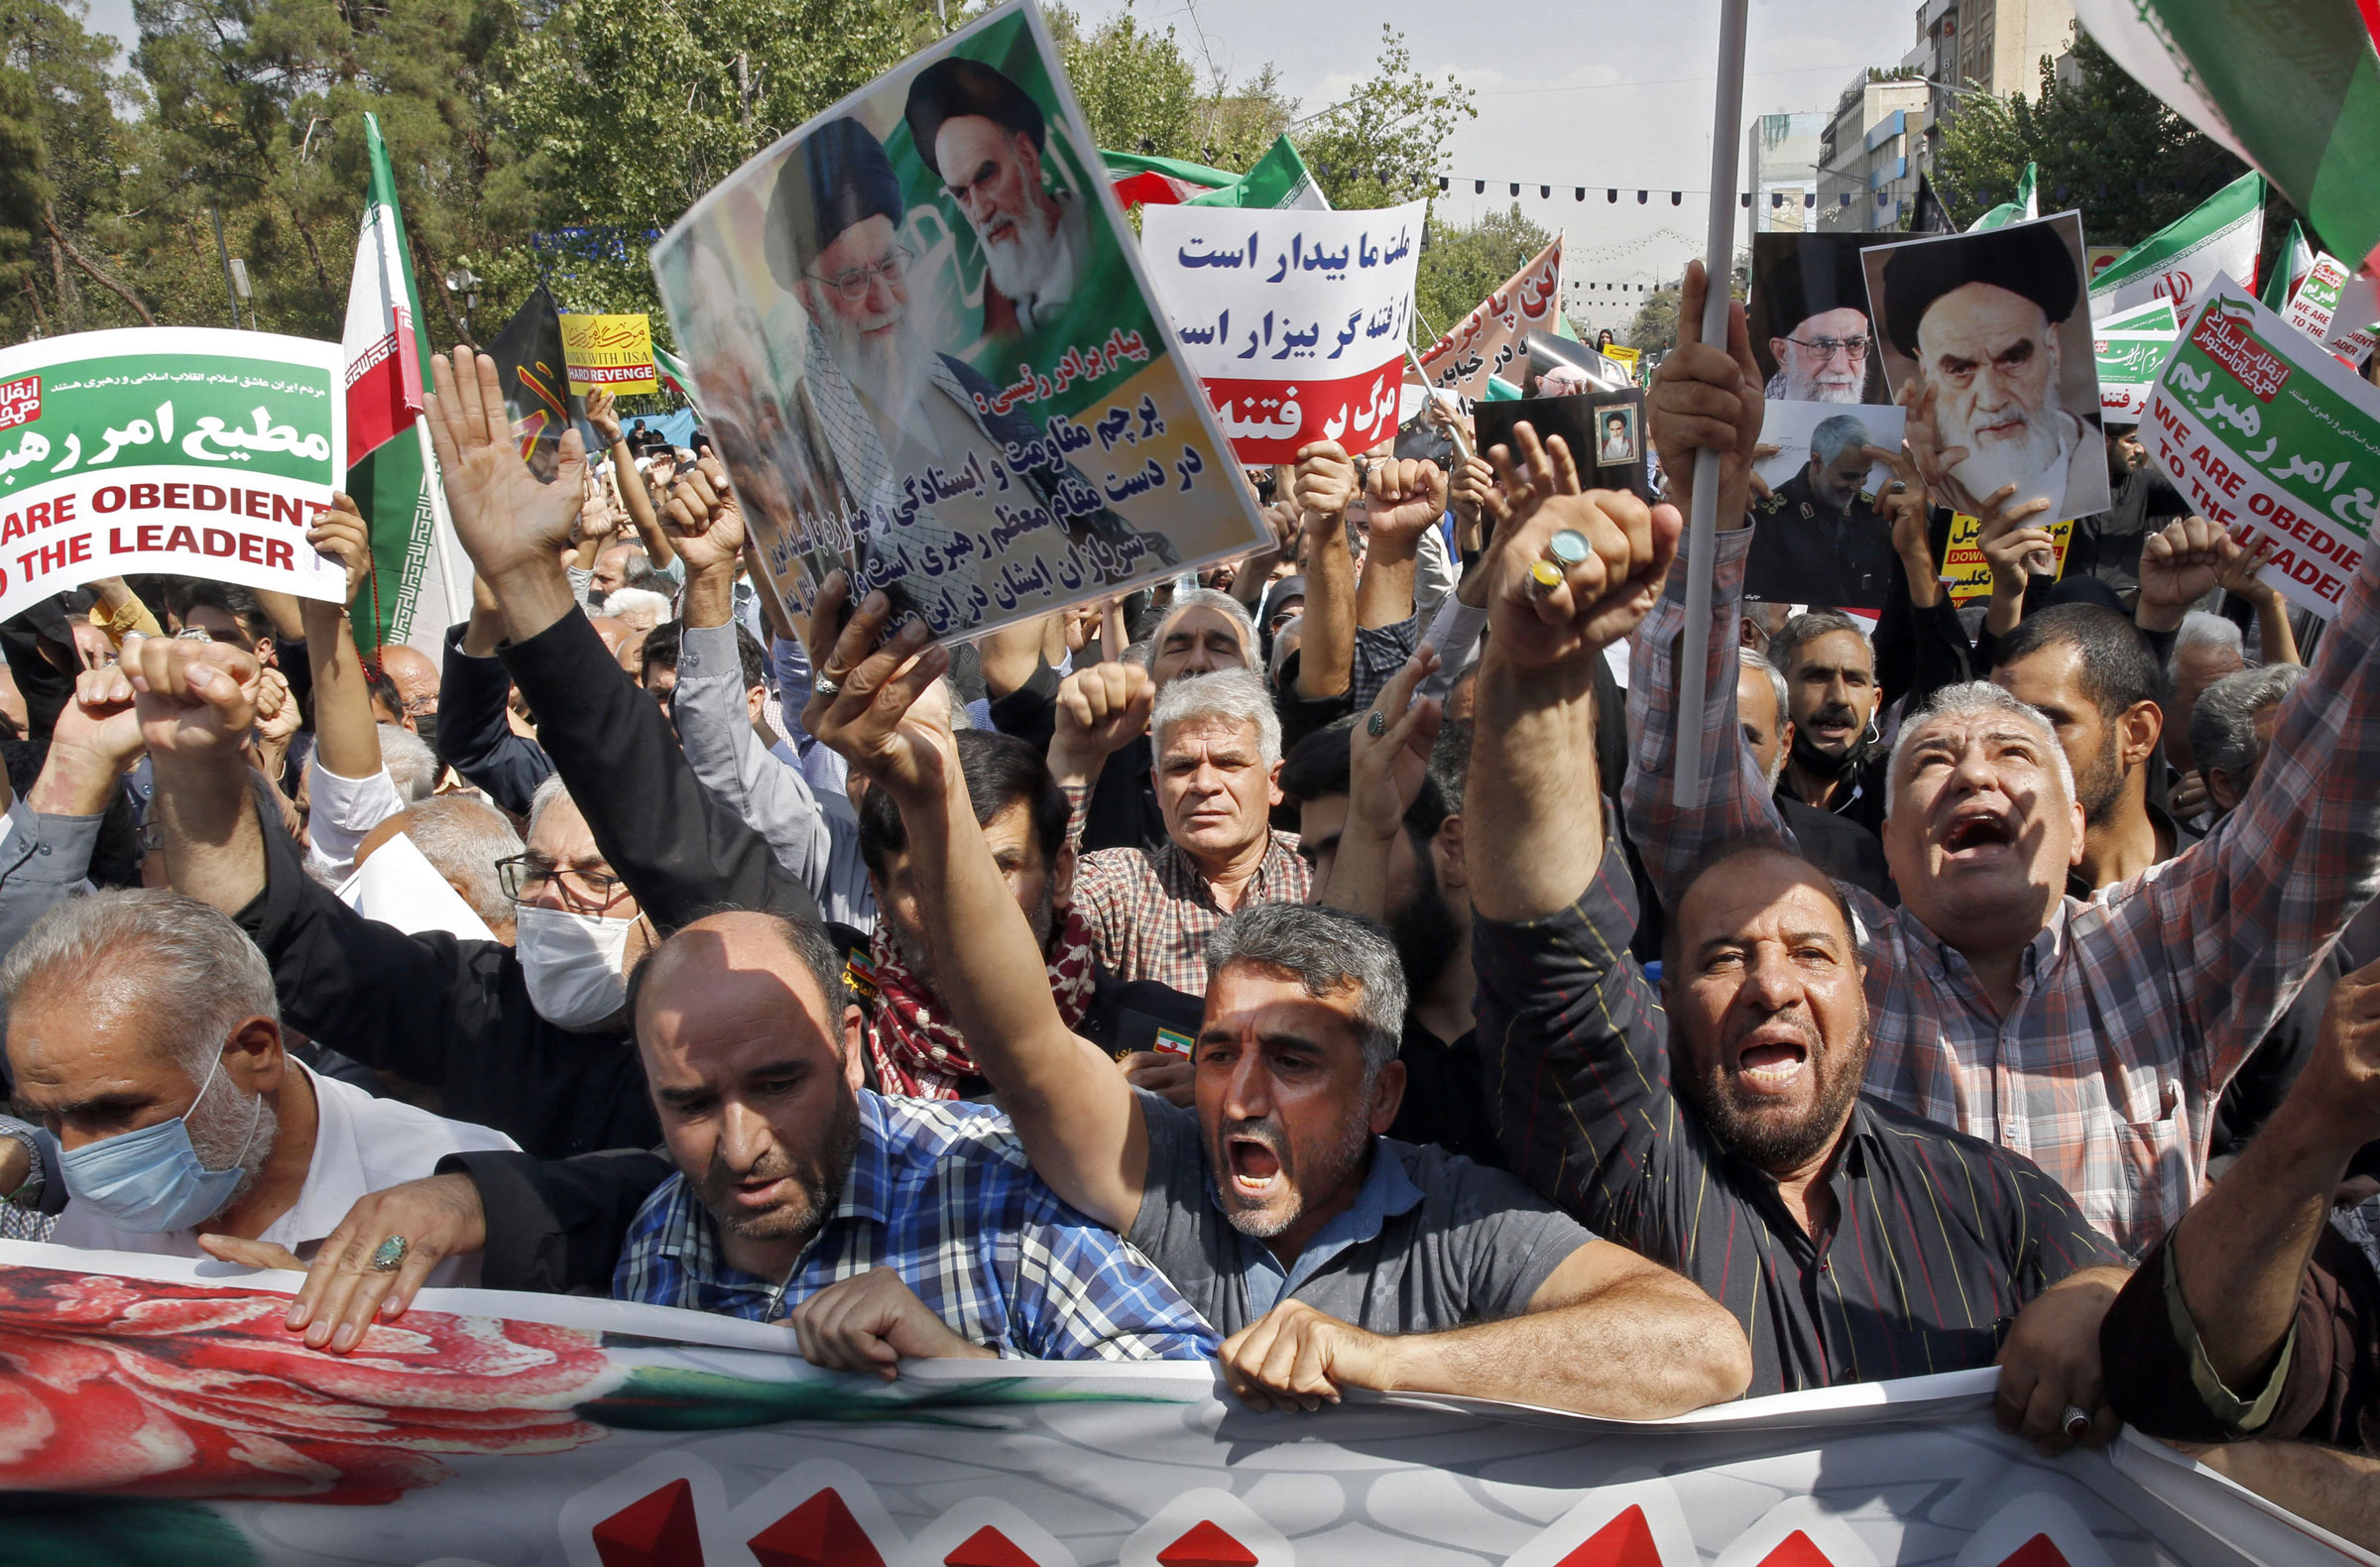 <b>Tehran, Iran </b>Thousands of people marched through Iran's capital during a pro-hijab rally Friday, Sept. 23, 2022 paying tribute to security forces who have moved to quell a week of protests by what media called "conspirators". (AFP/Getty Images)